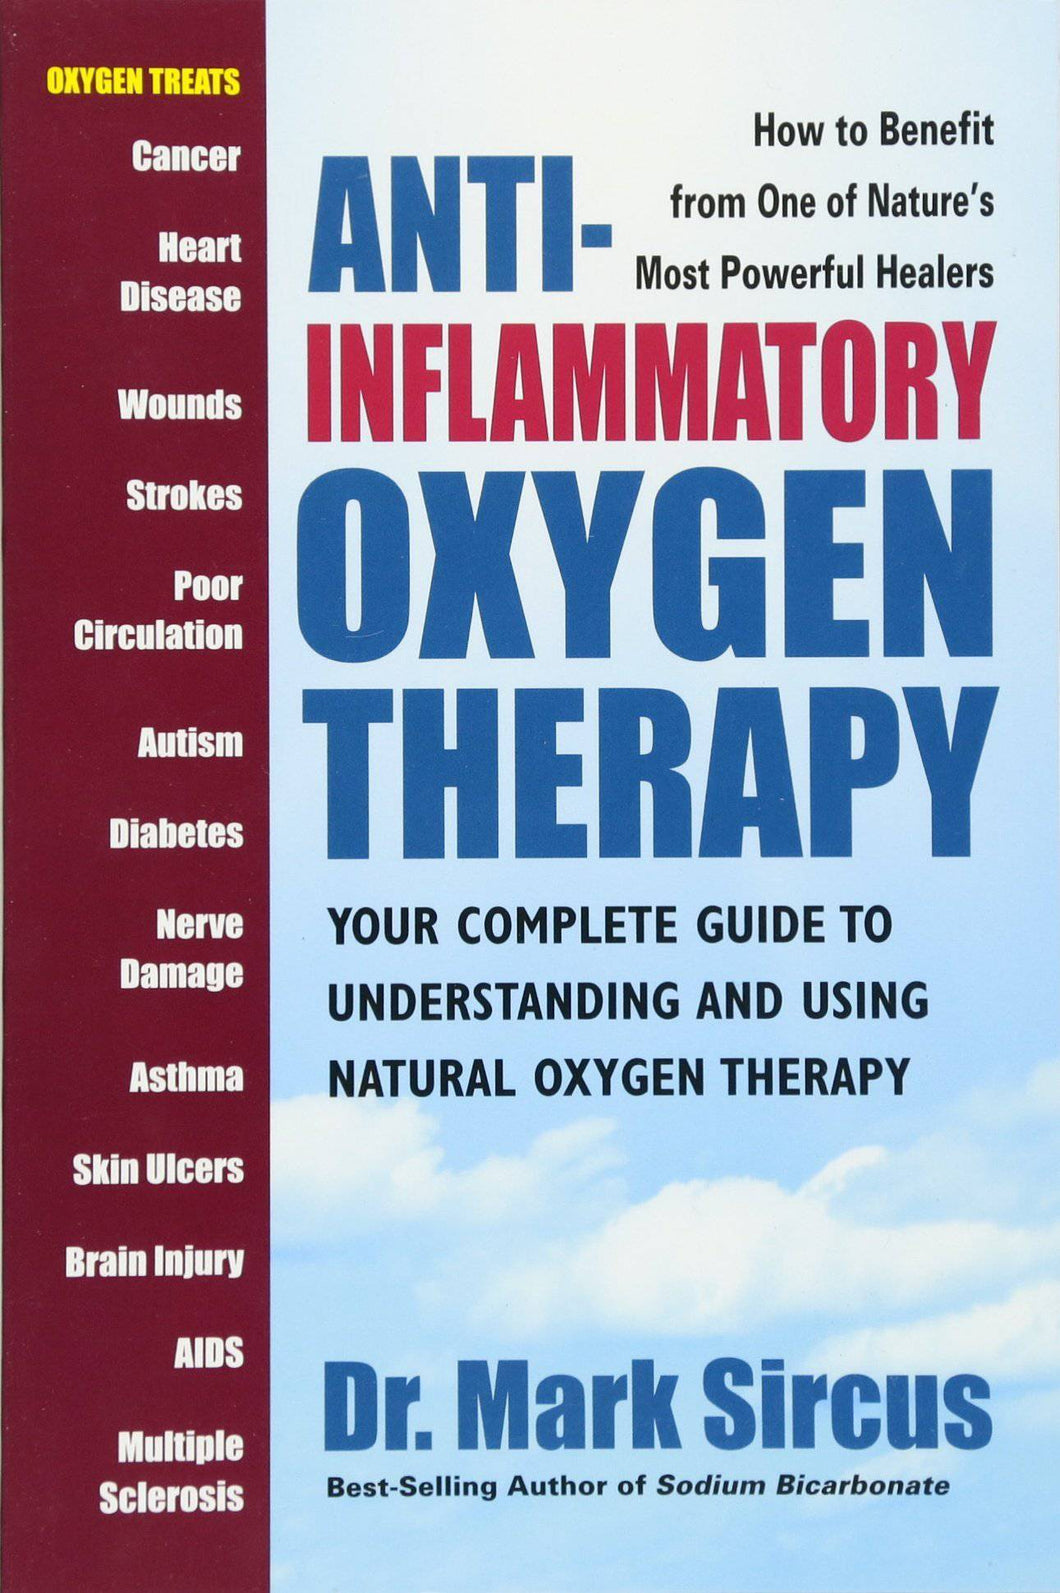 Anti-Inflammatory Oxygen Therapy-Your Complete Guide to Understanding and Using Natural Oxygen Therapy - EWOT